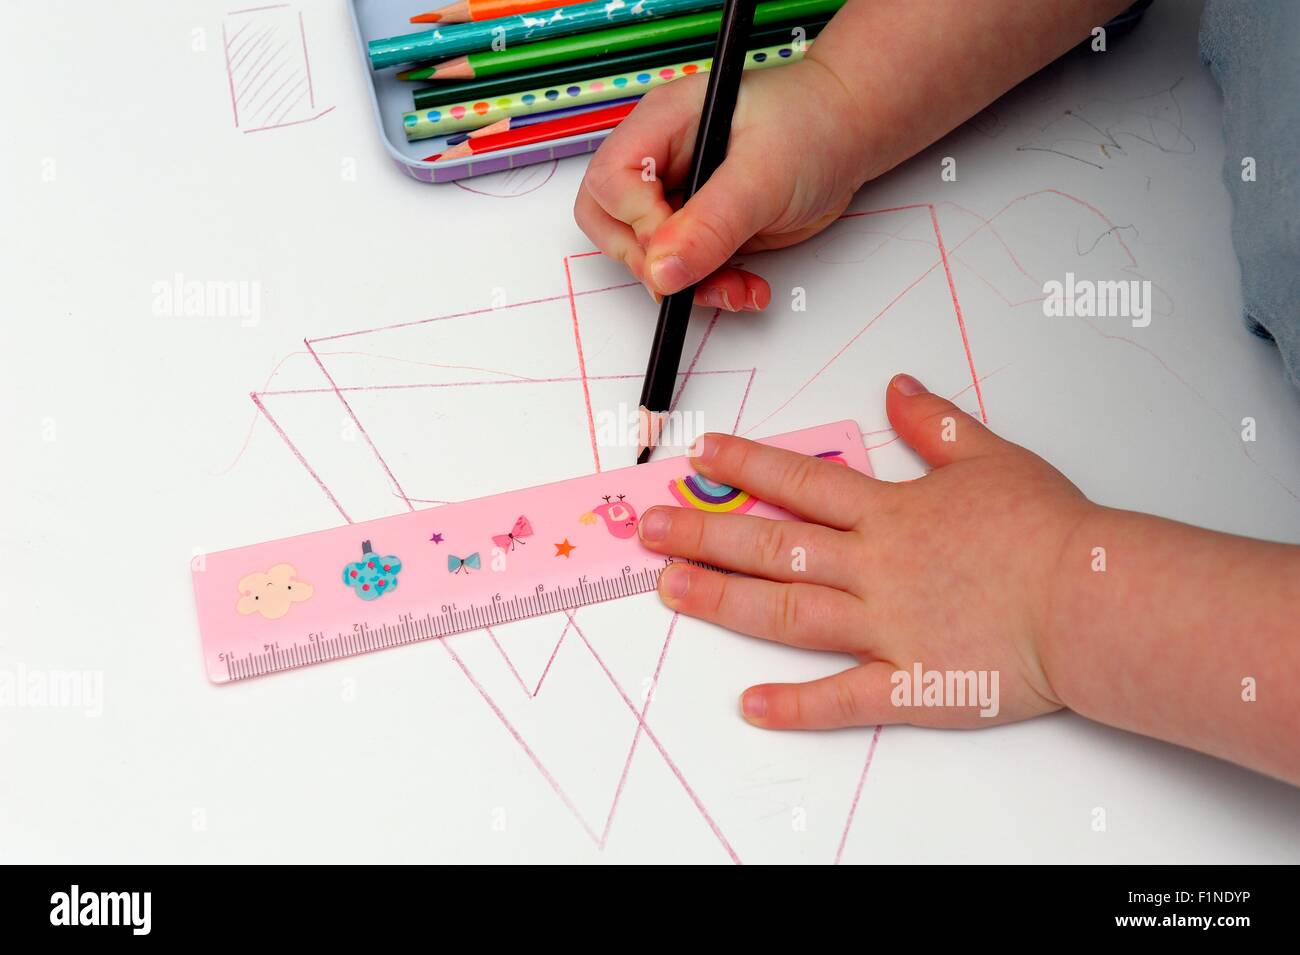 A 3 year old toddler girl using a ruler to draw straight lines Stock Photo